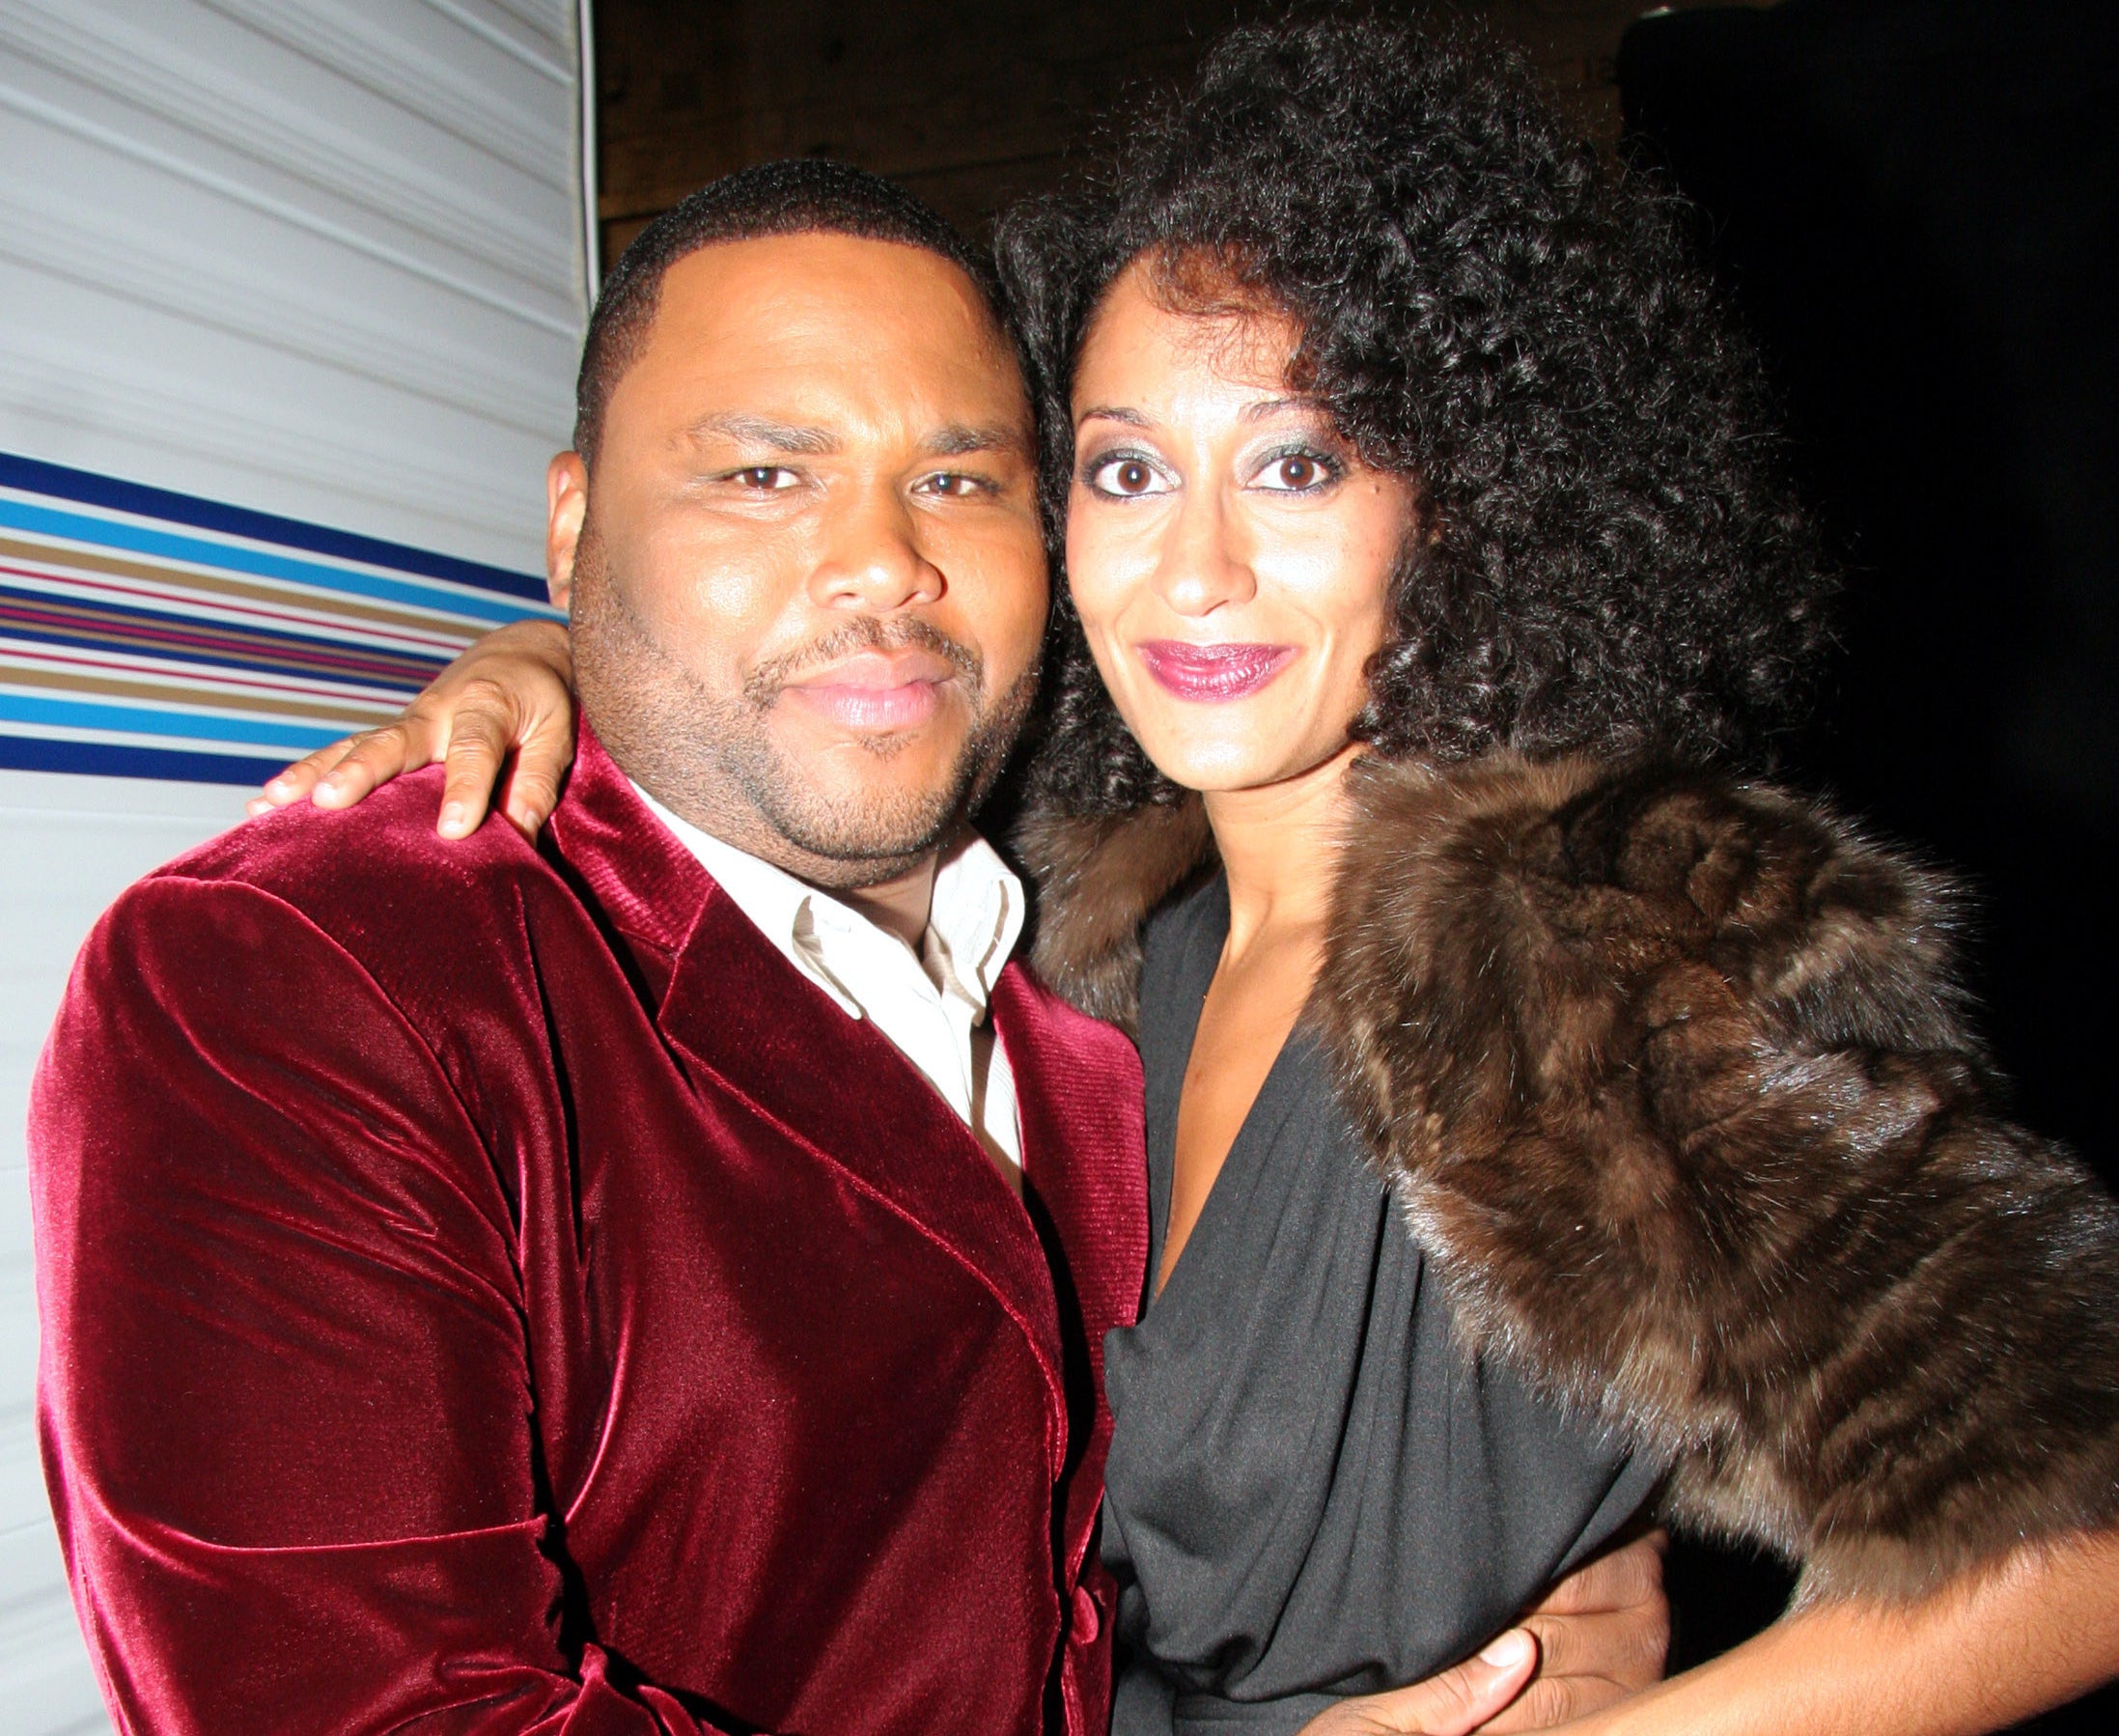 Tracee and Anthony pose together before the award show